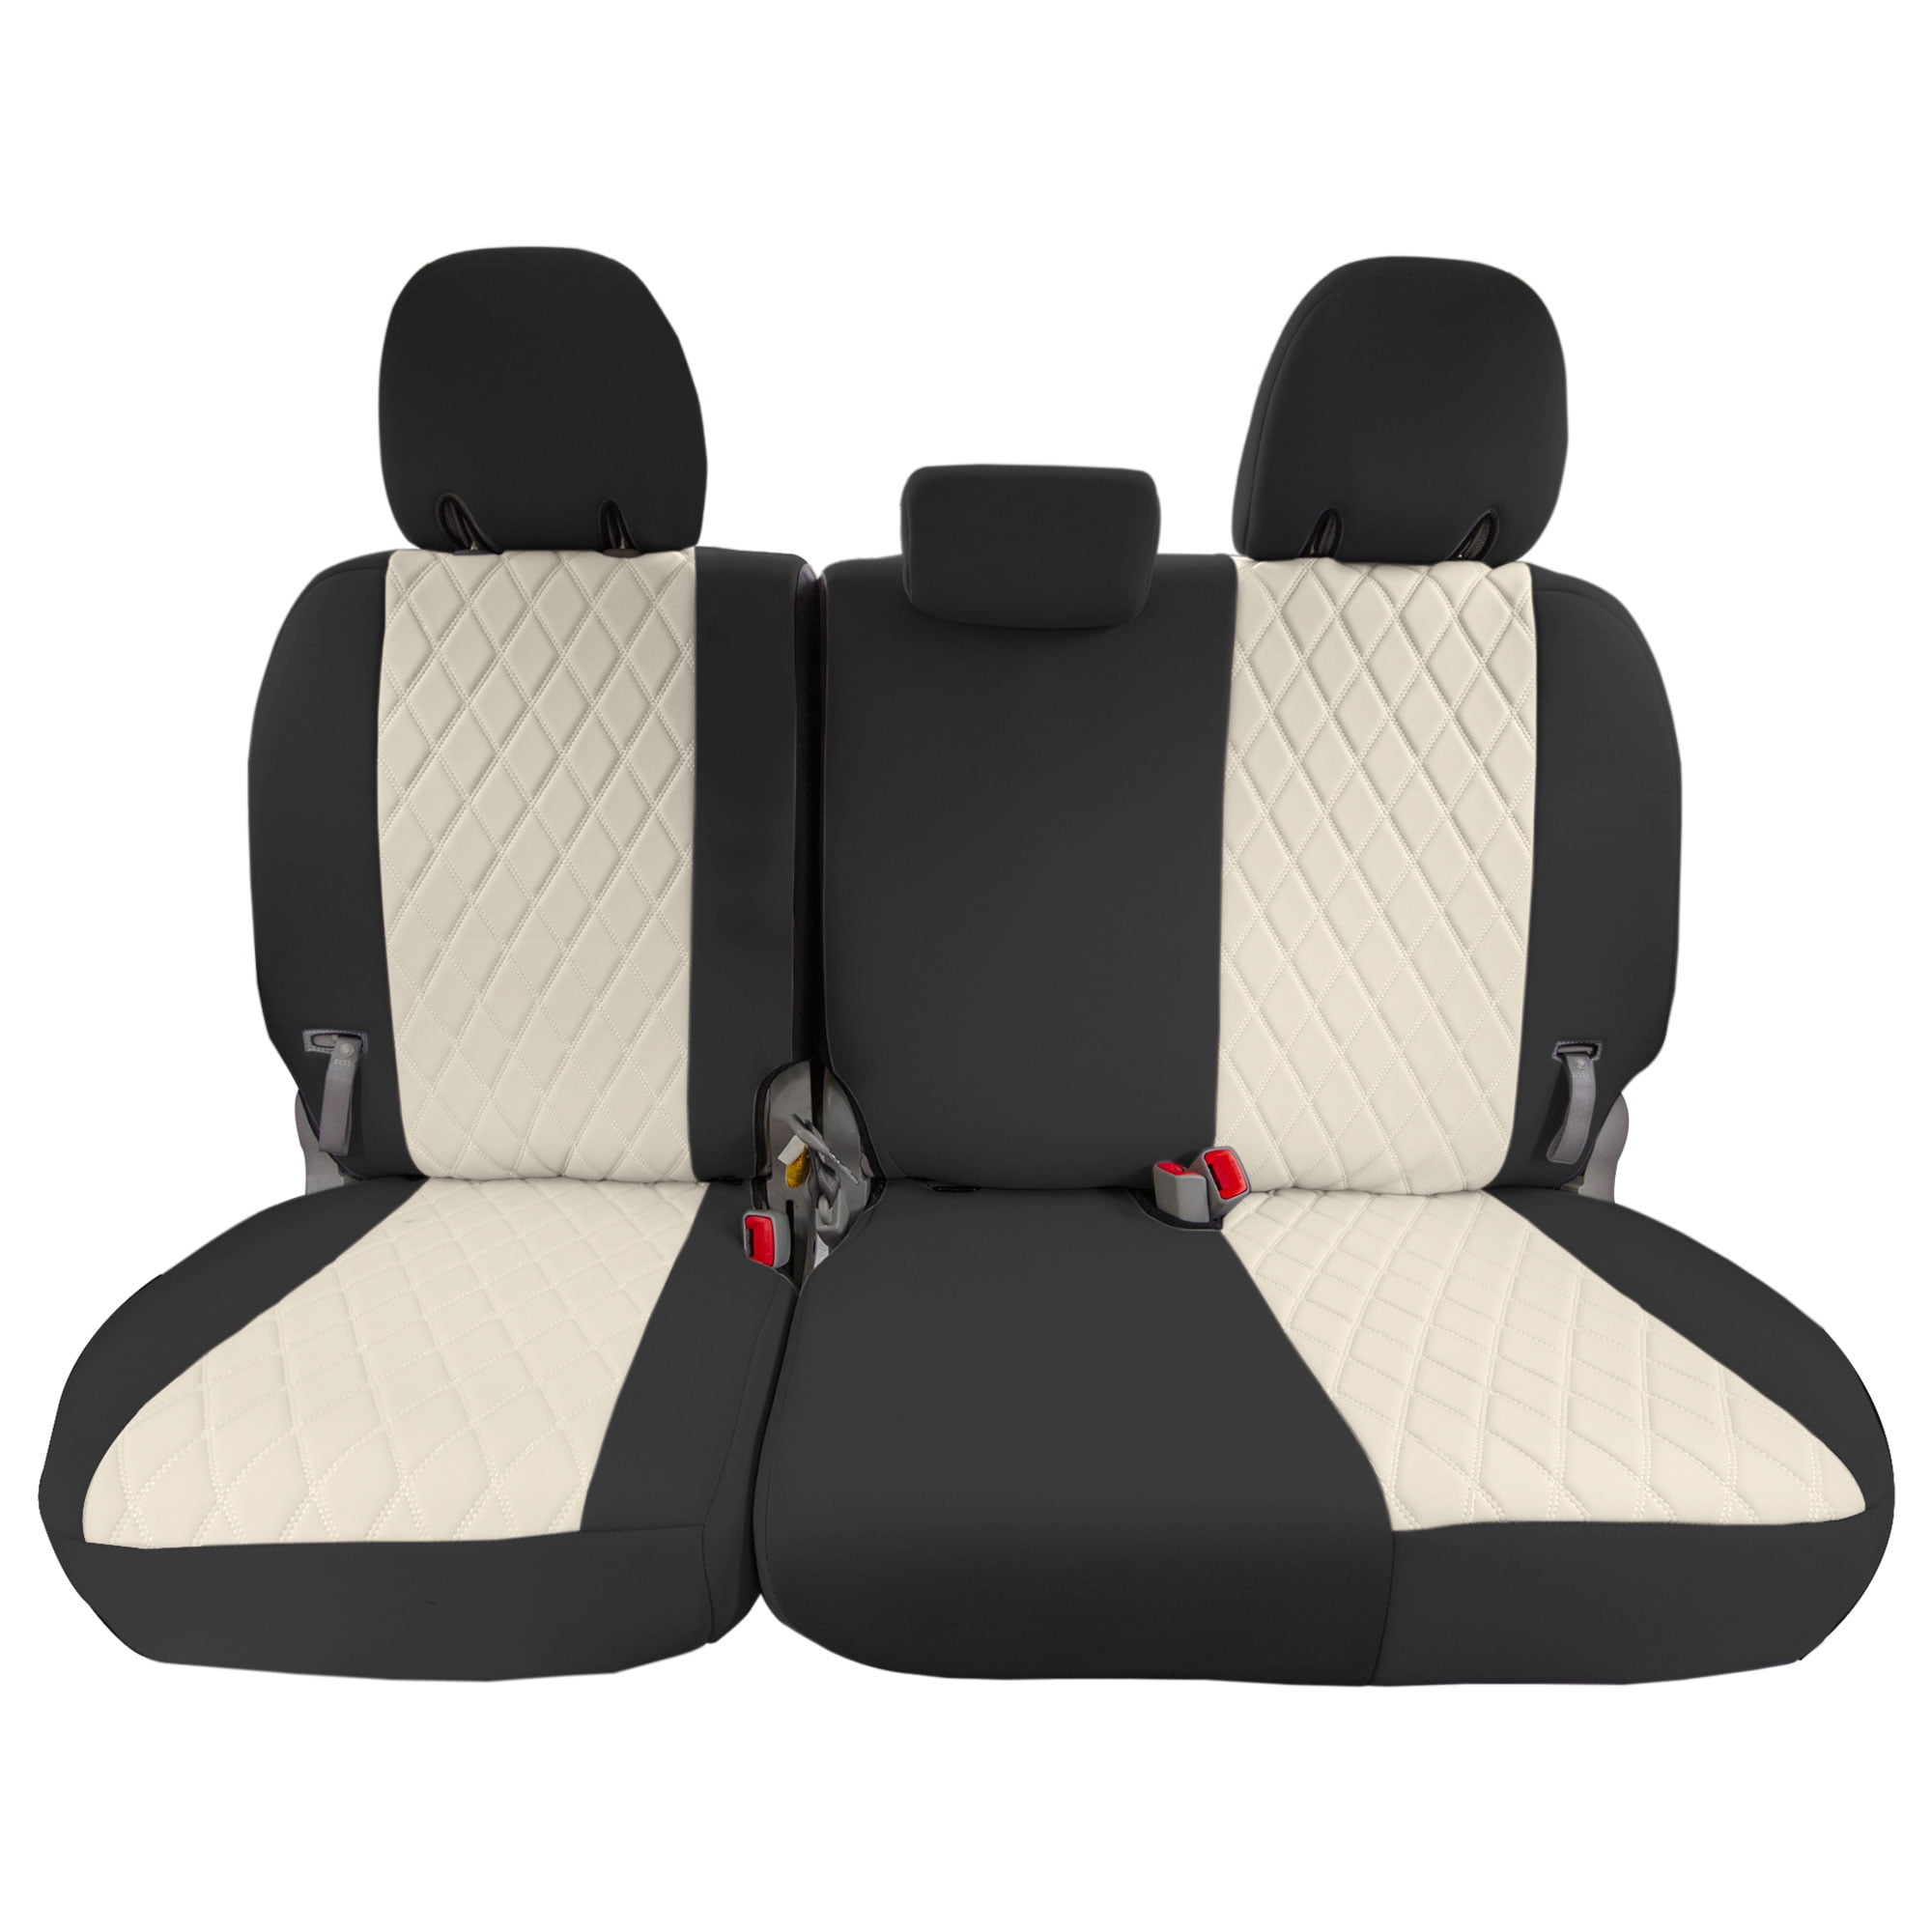 FH Group Custom Fit Car Seat Covers for Toyota Sienna 2011-2020, Car Seat  Cover Middle Set, Automotive Seat Covers in Beige Neoprene, Waterproof and  Washable Seat Covers